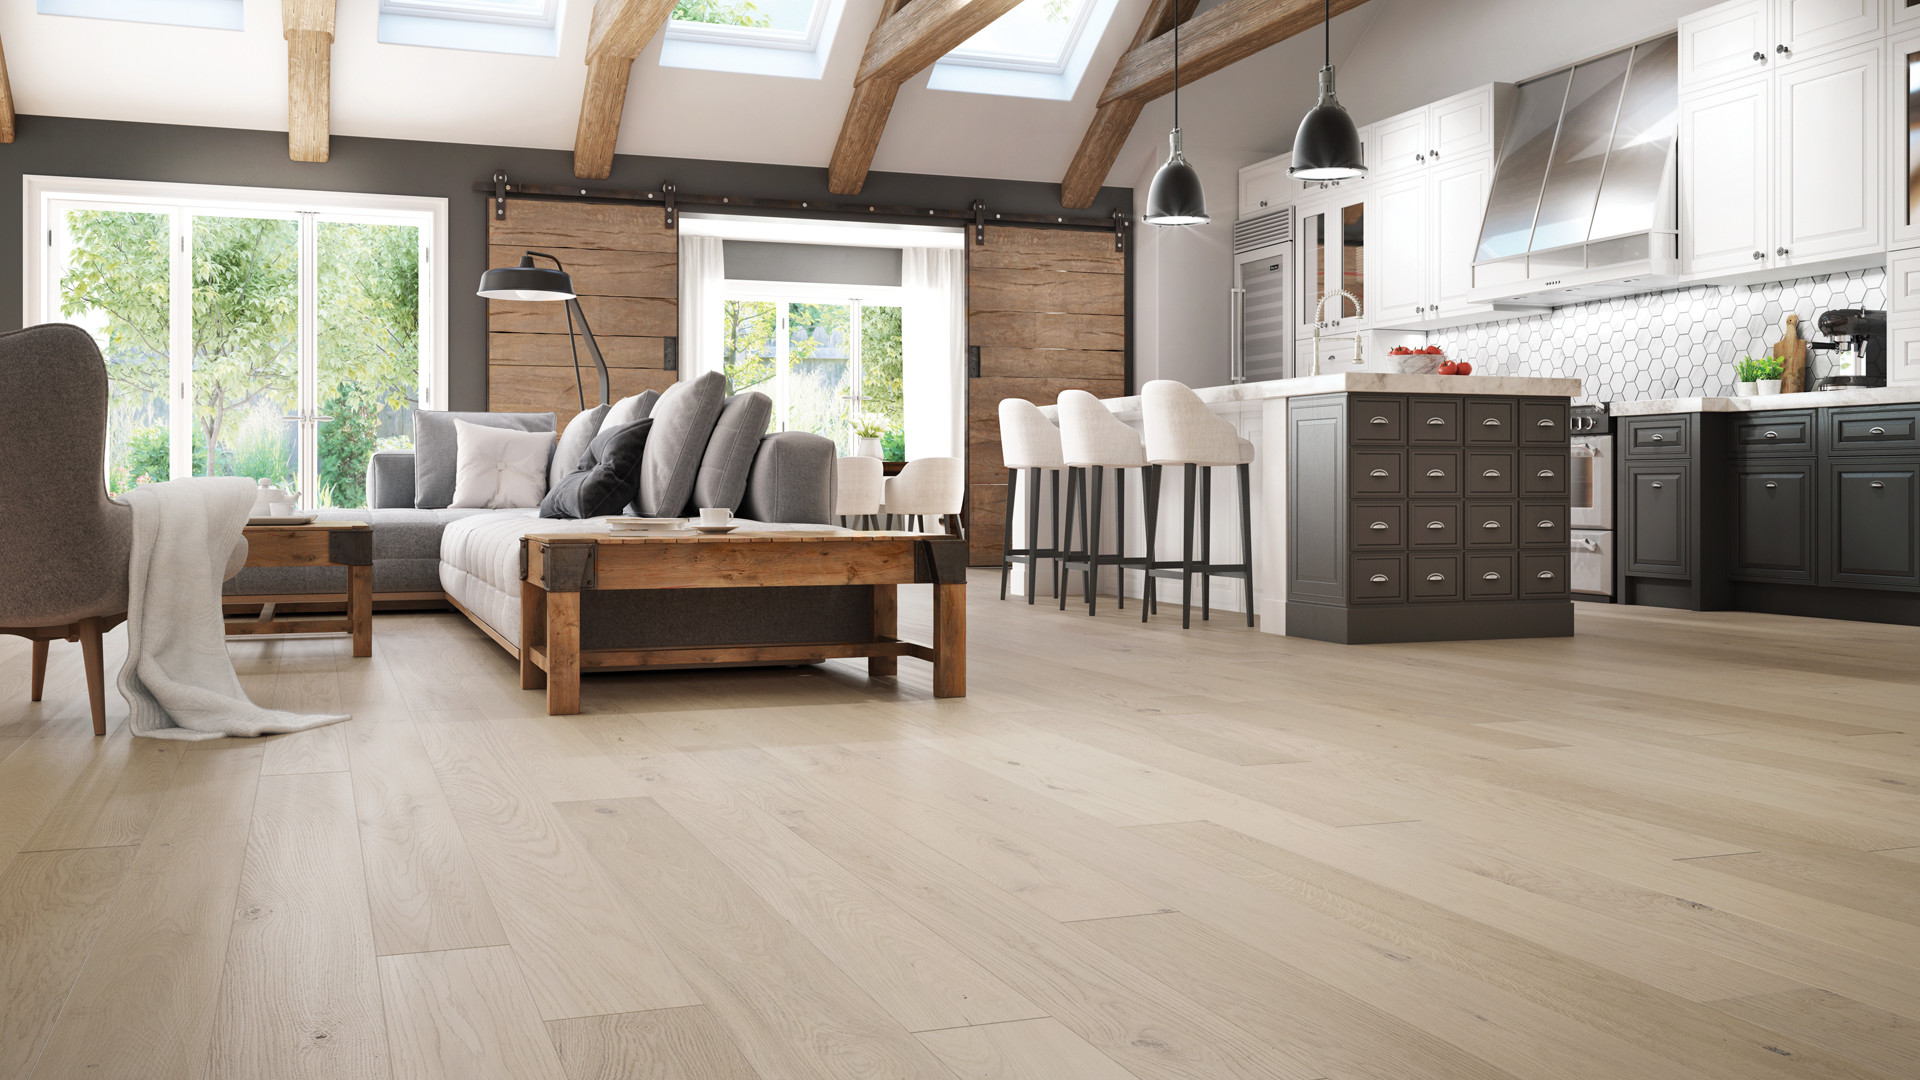 19 Unique Types Of Wood Used for Hardwood Flooring 2024 free download types of wood used for hardwood flooring of 4 latest hardwood flooring trends of 2018 lauzon flooring with this technology brings your hardwood floors and well being to a new level by improv